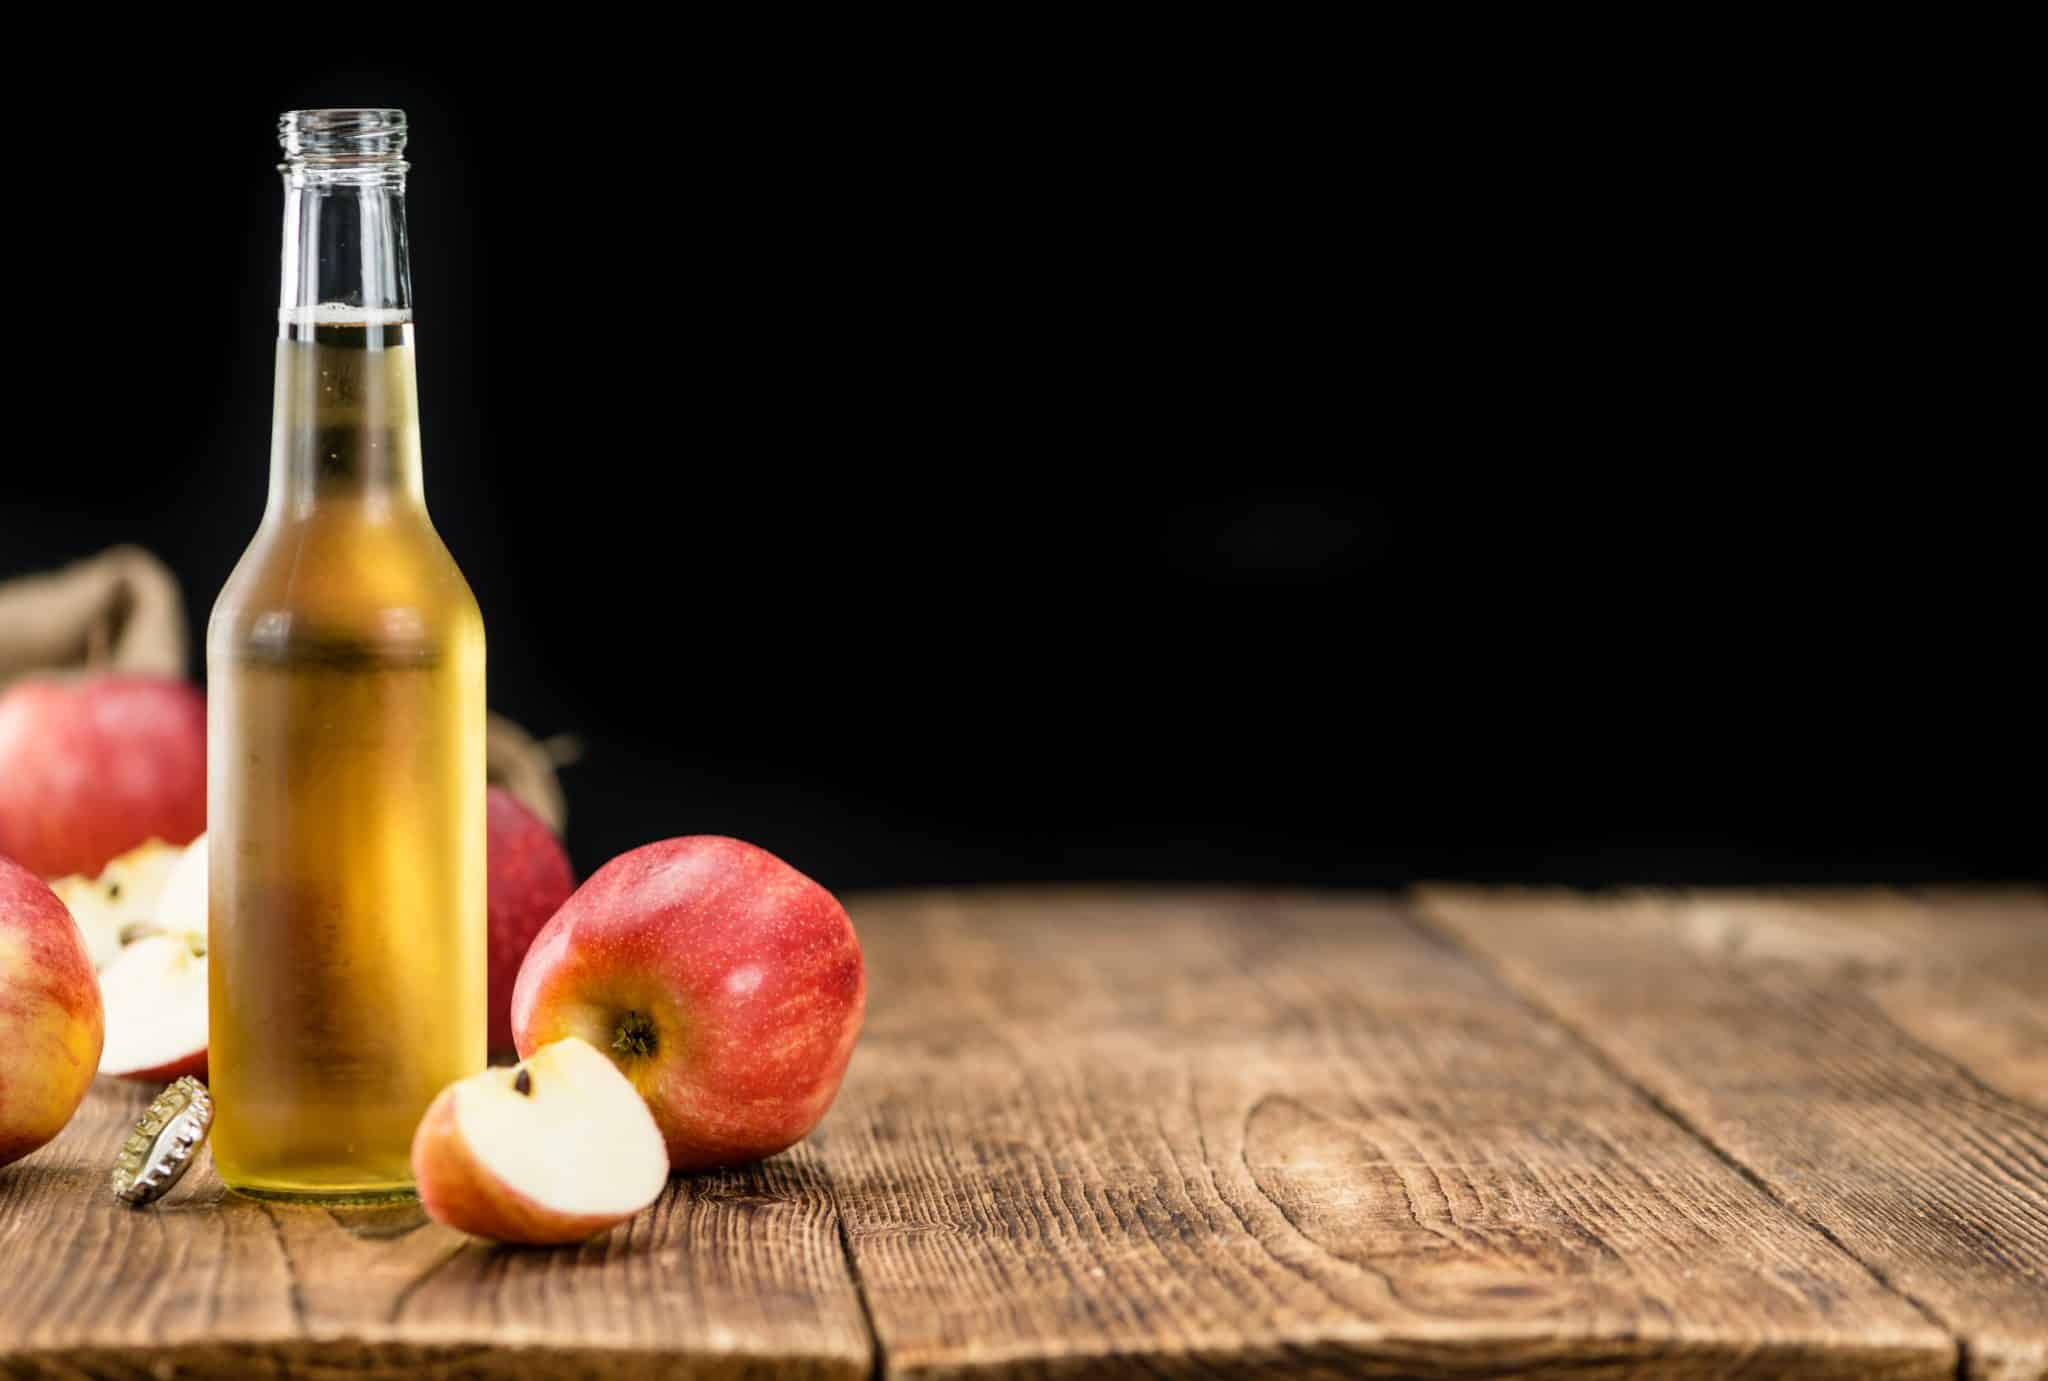 The image shows a clear bottle of golden liquid on a wooden table with red apples around it, suggesting apple cider, with a dark background.